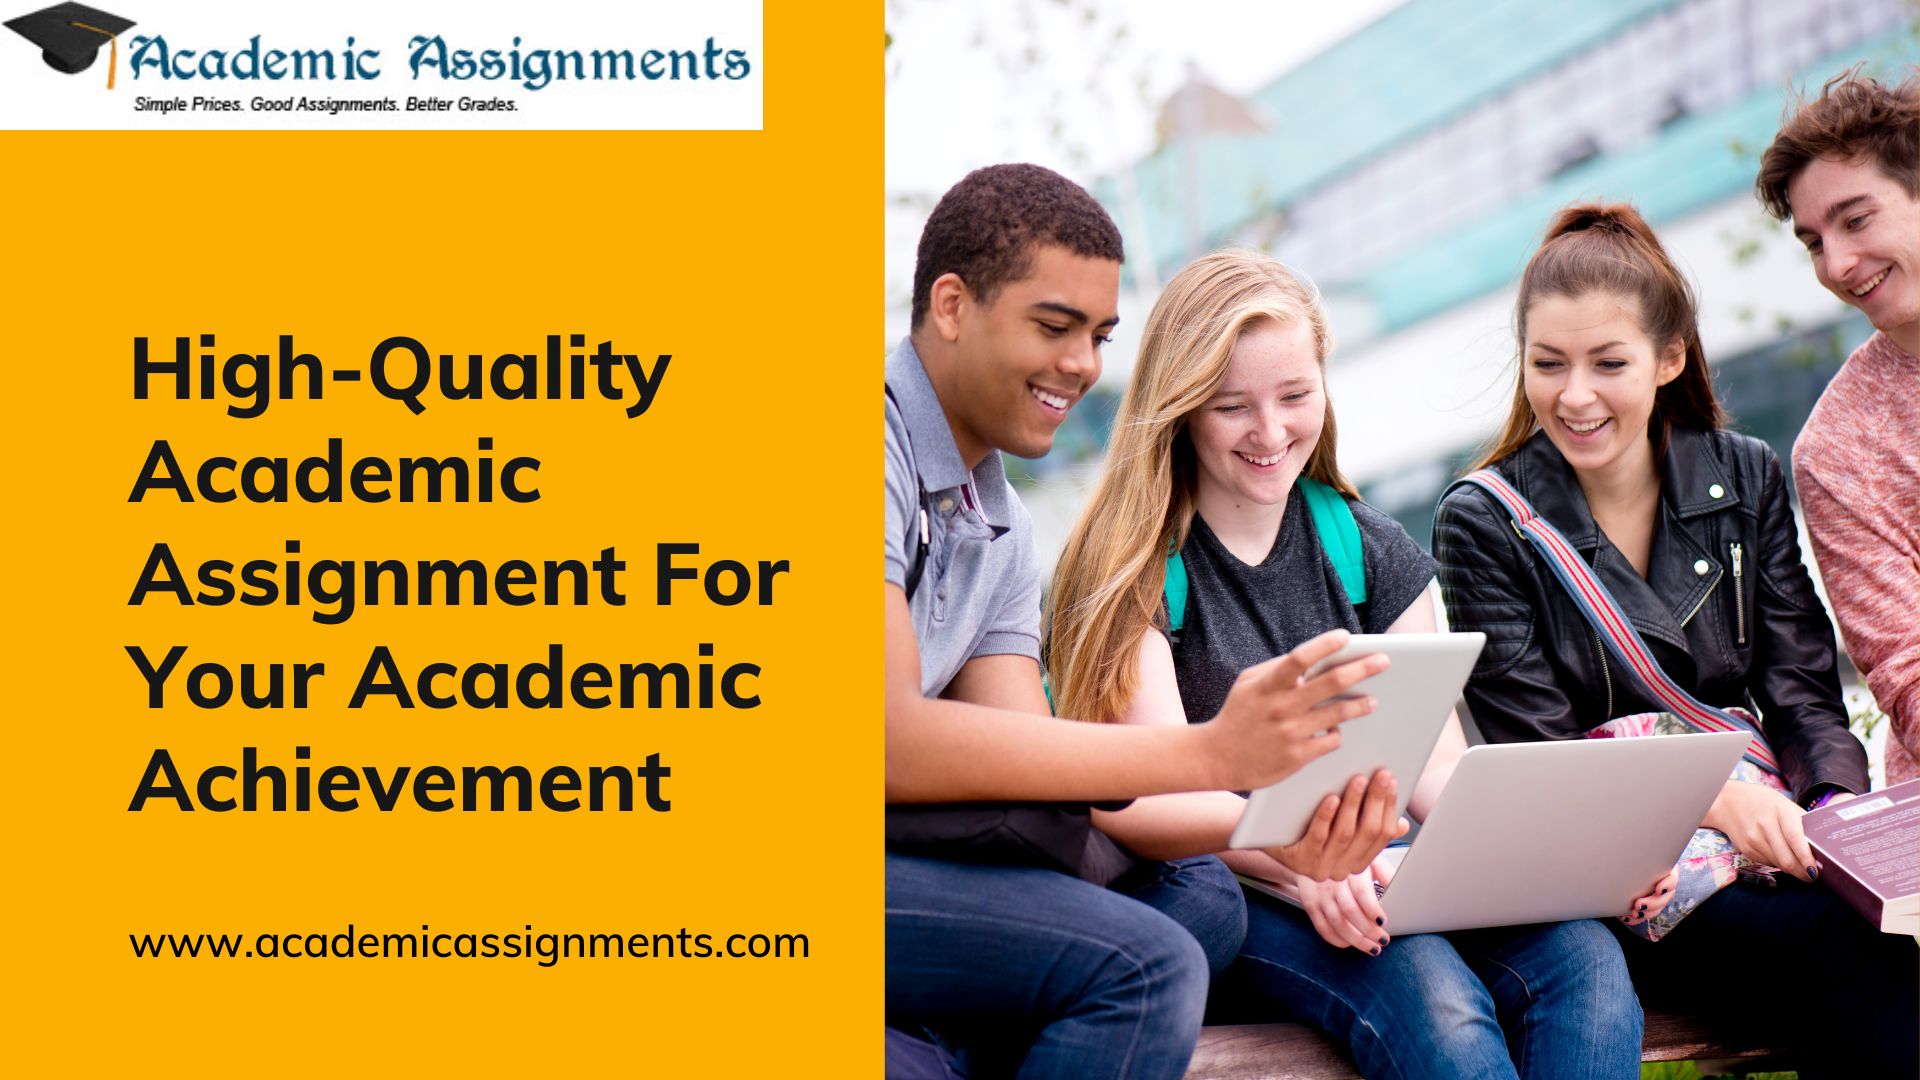 High-Quality Academic Assignment For Your Academic Achievement